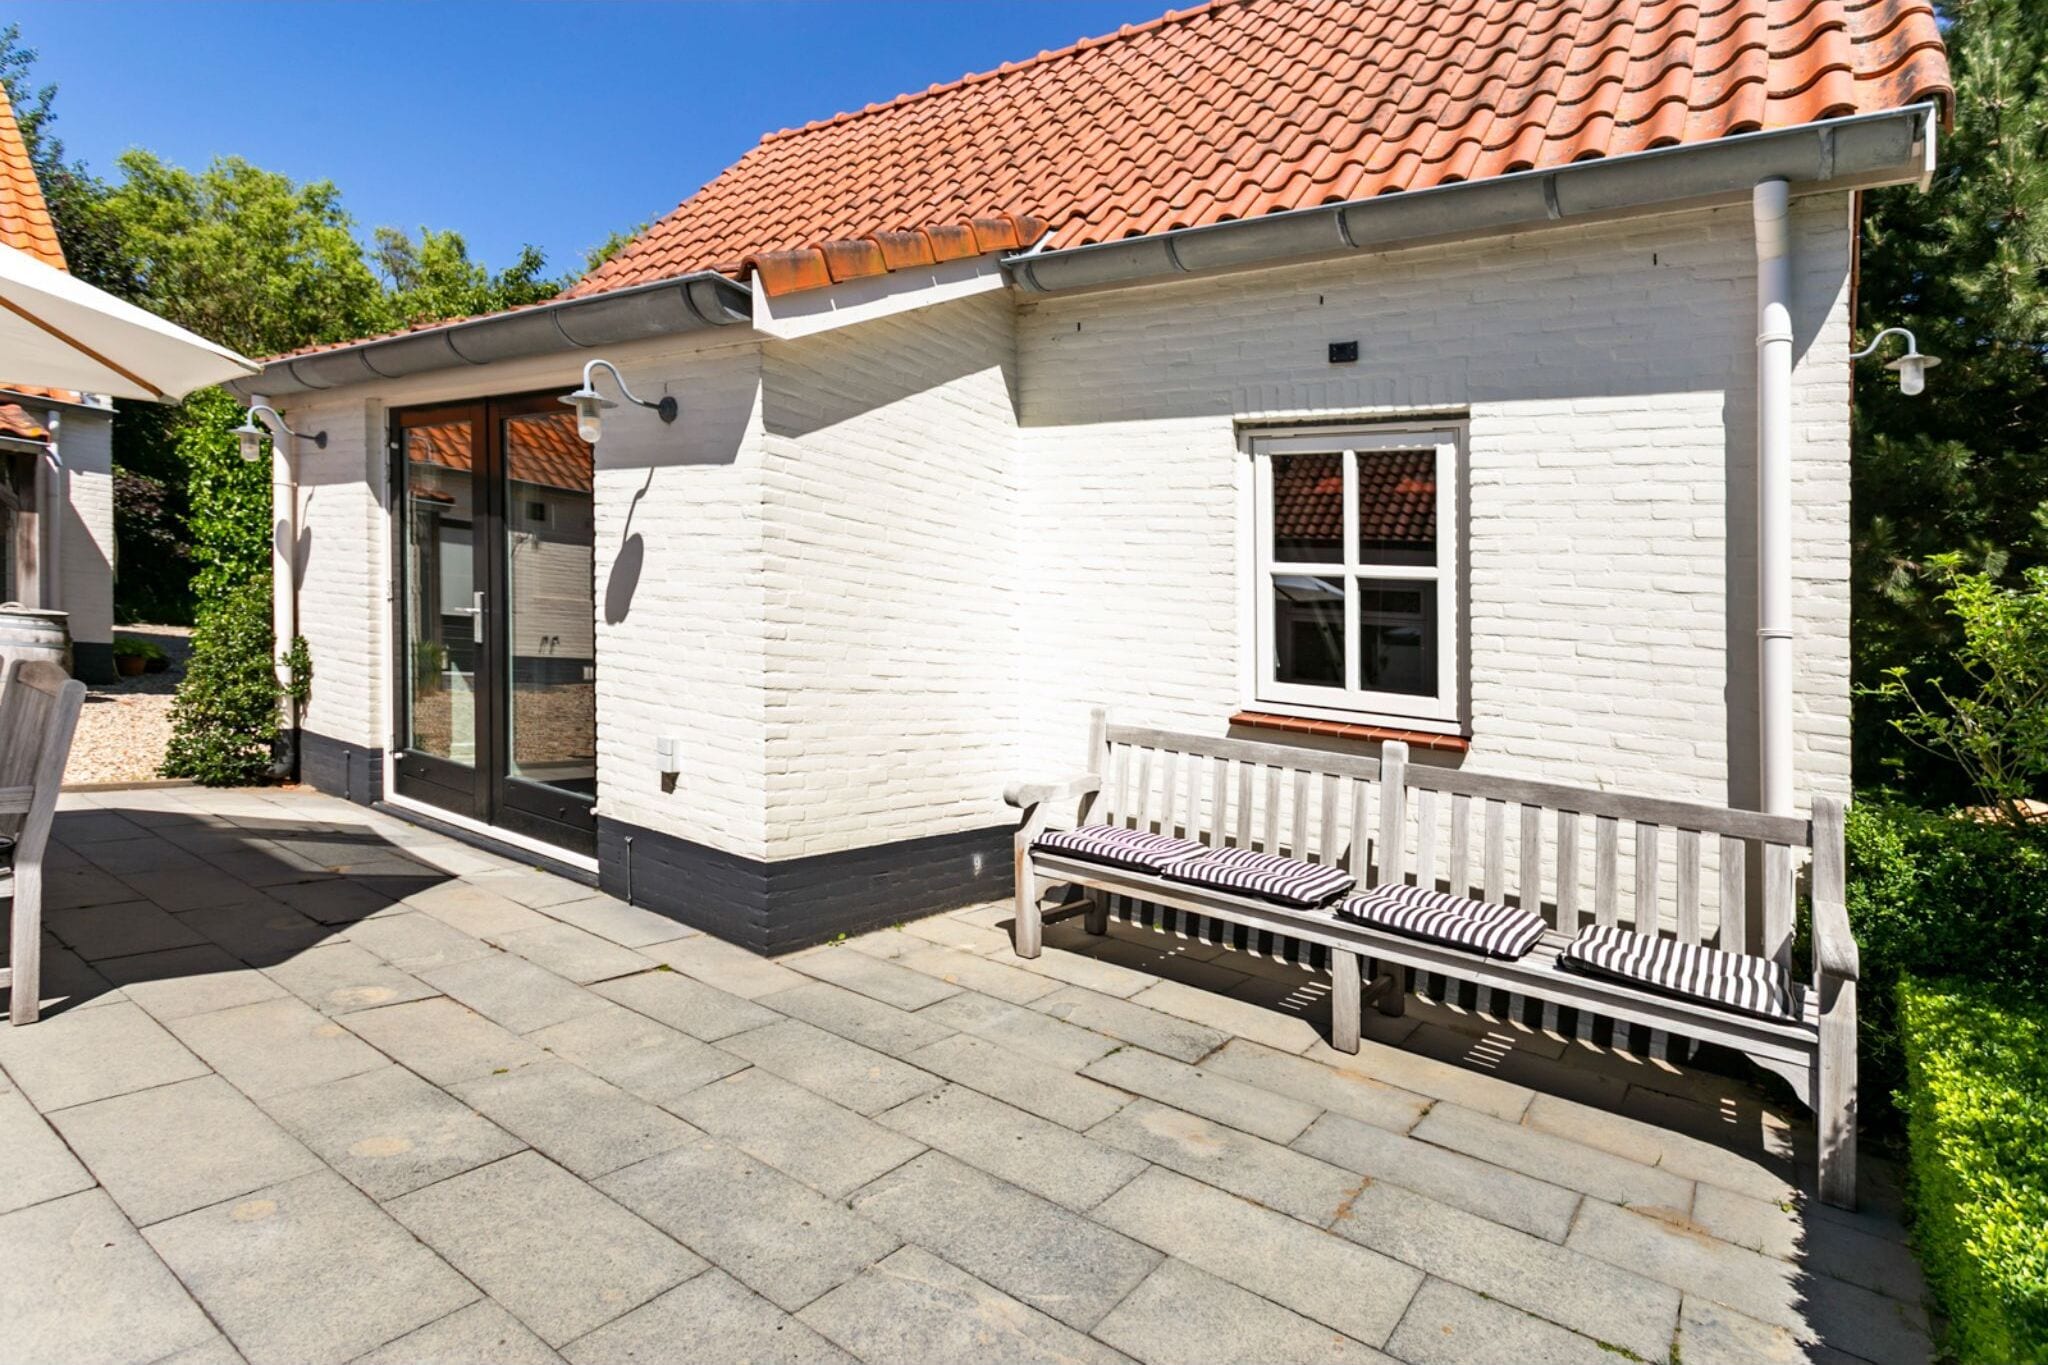 Charming 4-person holiday home in one of the prettiest spots of Ouddorp